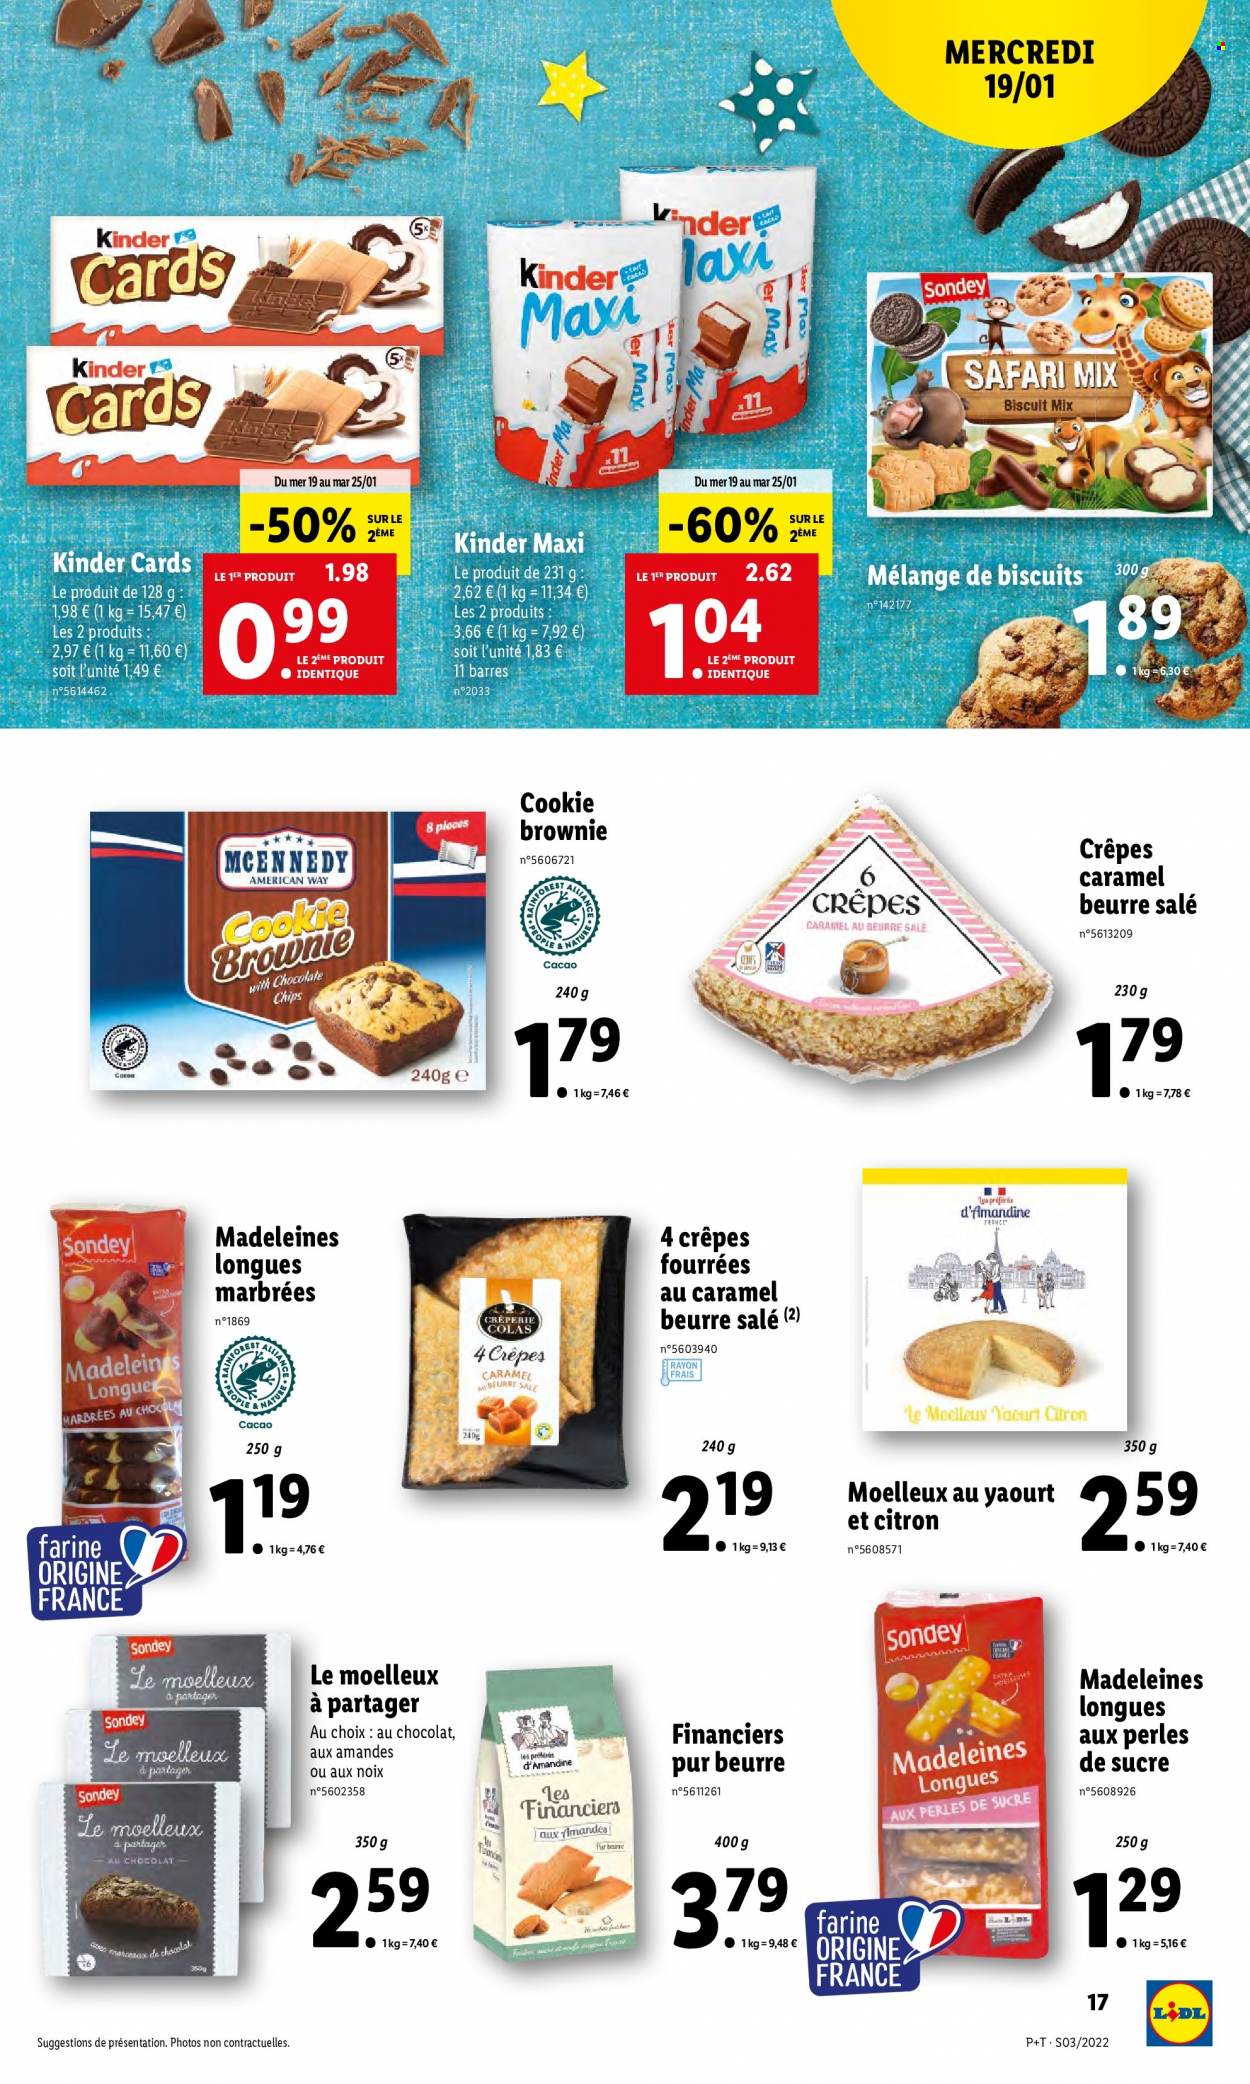 thumbnail - Catalogue Lidl - 19/01/2022 - 25/01/2022 - Produits soldés - madeleines, crêpes, brownie, yaourt, biscuits, Kinder, Kinder Maxi, farine. Page 19.